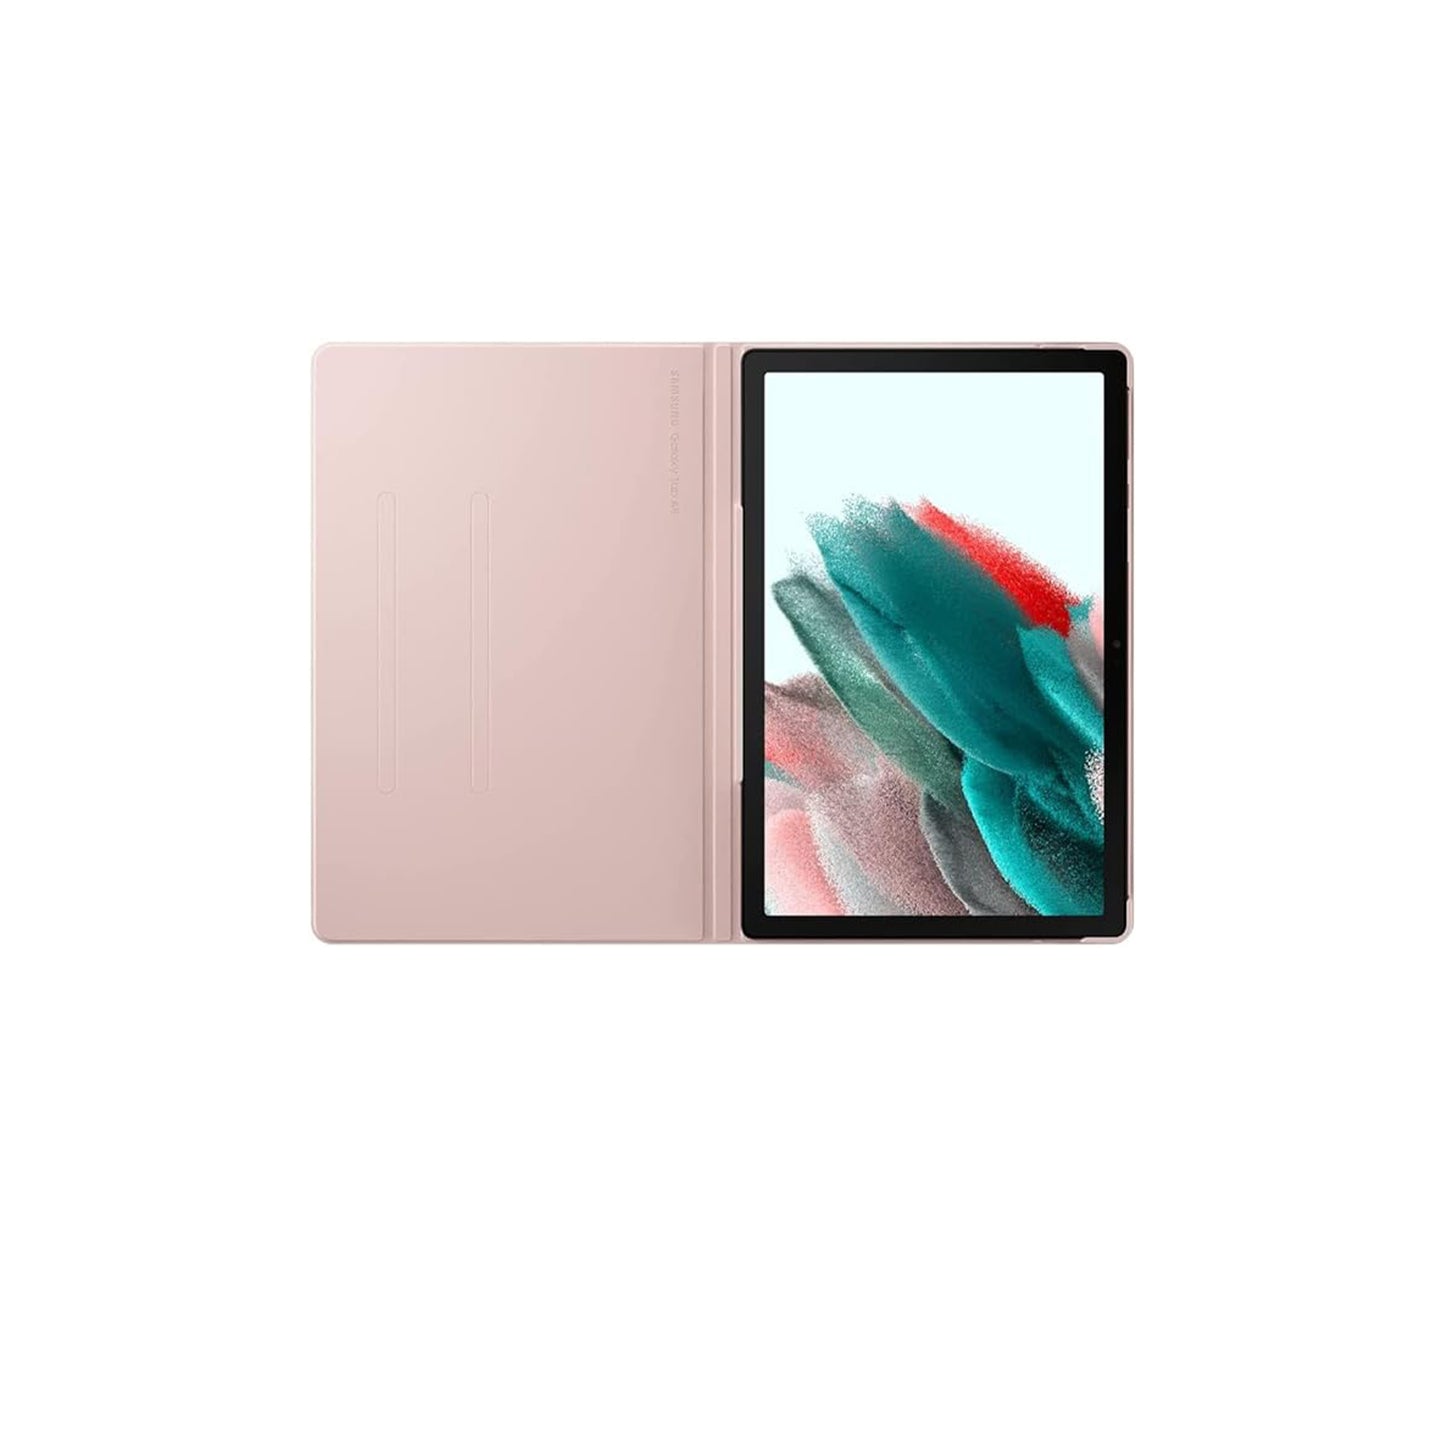 SAMSUNG Galaxy Tab A8 Book Cover, Protective Tablet Case w/ 2 Viewing Angles, Magnetic Design, S Pen Holder, Slim, Lightweight, US Version, Pink Gold